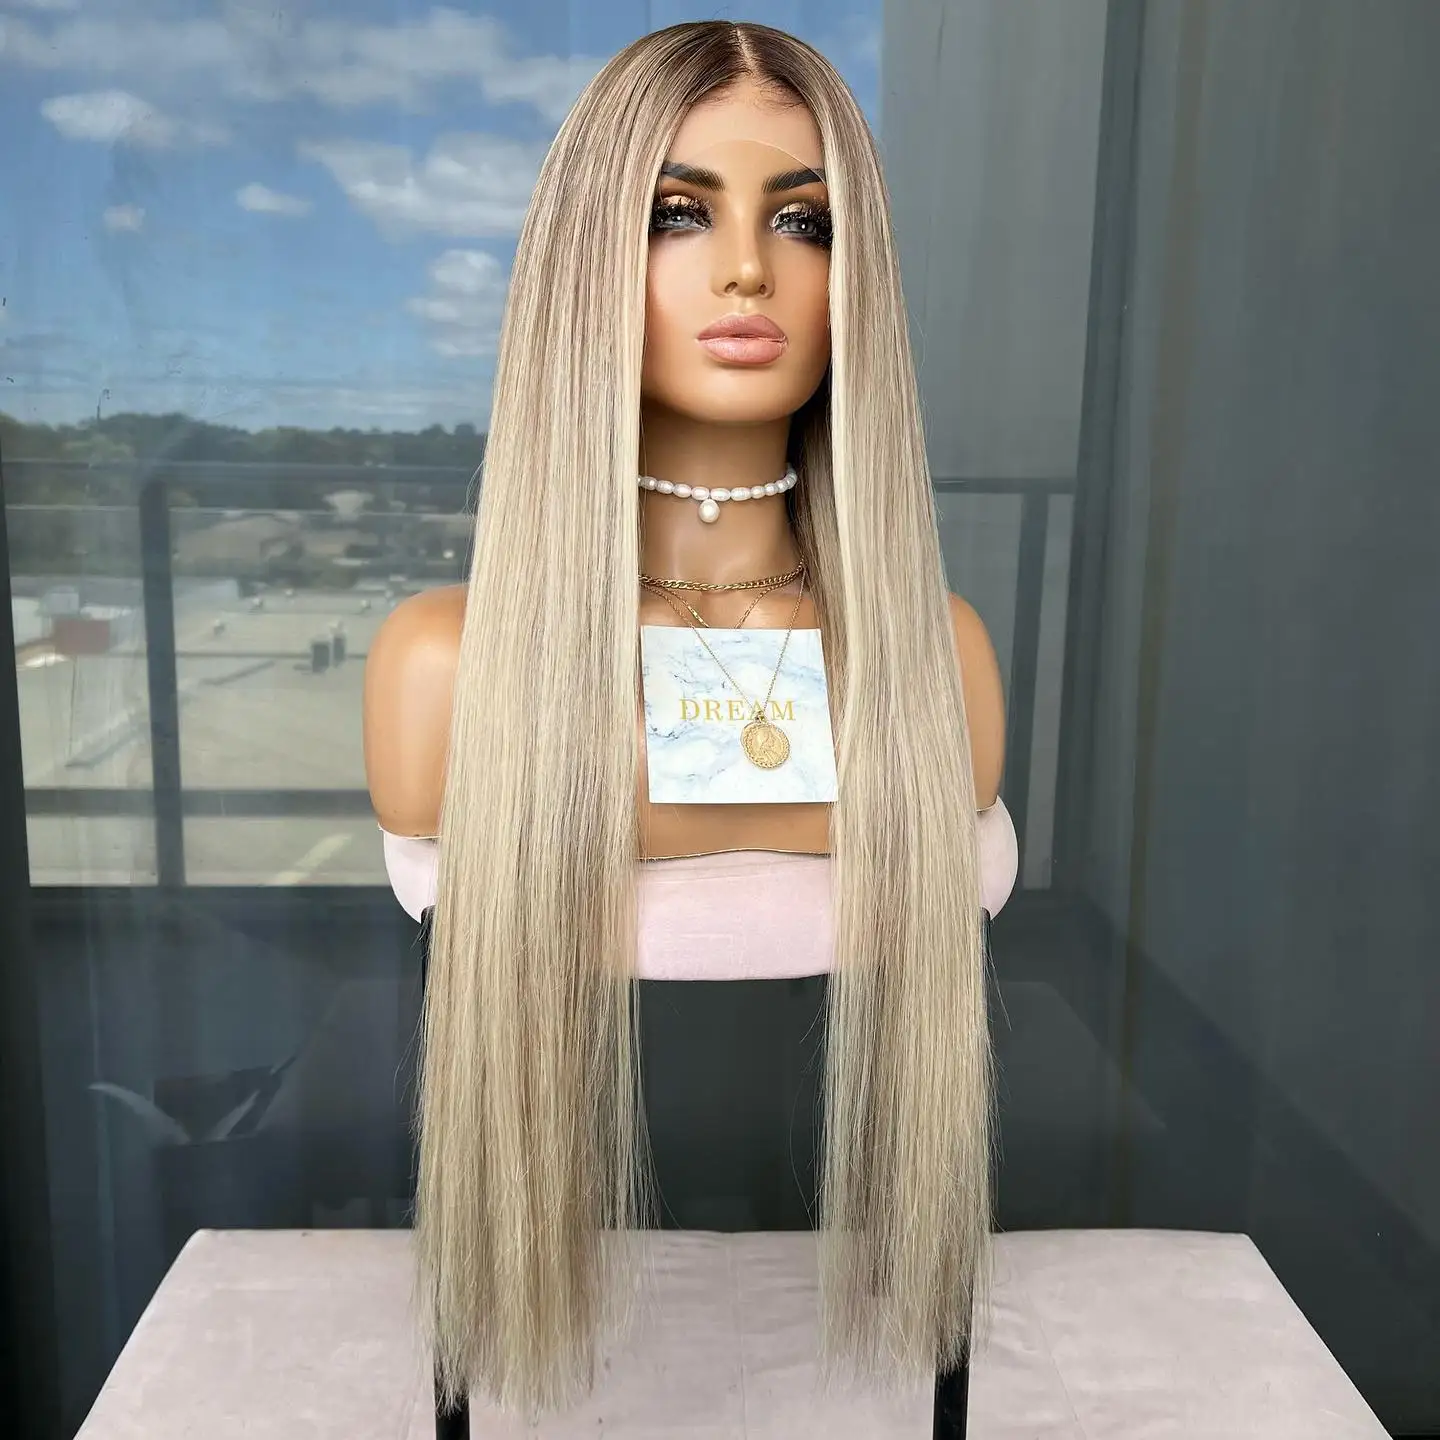 

QW Ash Blonde Ombre Preplucked Glueless Straight Highlights Synthetic Hair Lace Front Wigs for Women Frontal Wig Cosplay Party